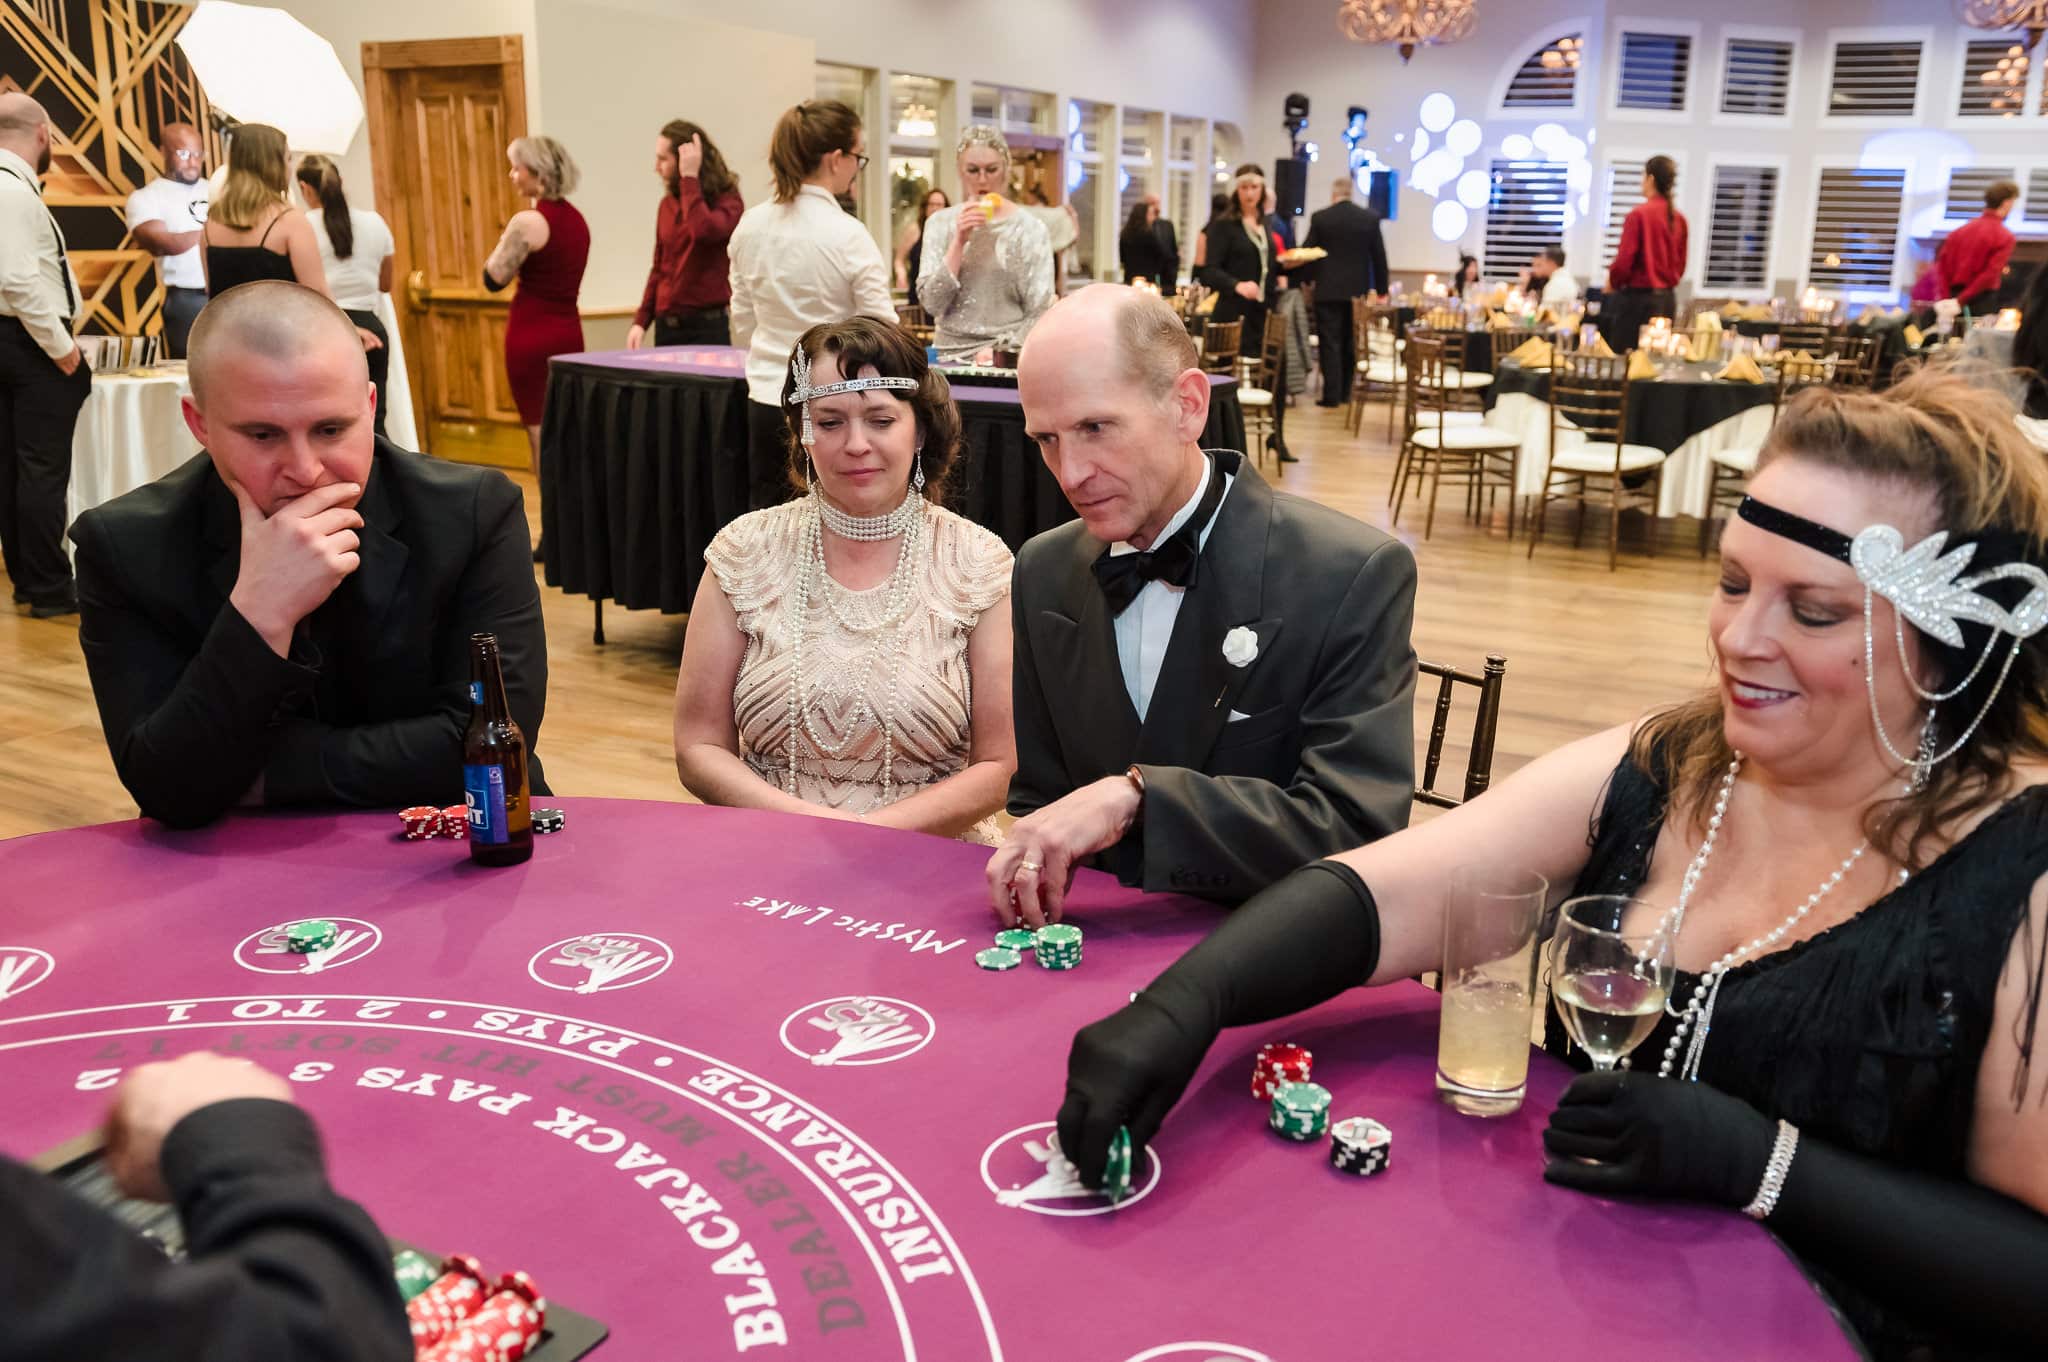 Guests at a surprise 40th birthday party enjoy playing blackjack for prizes.